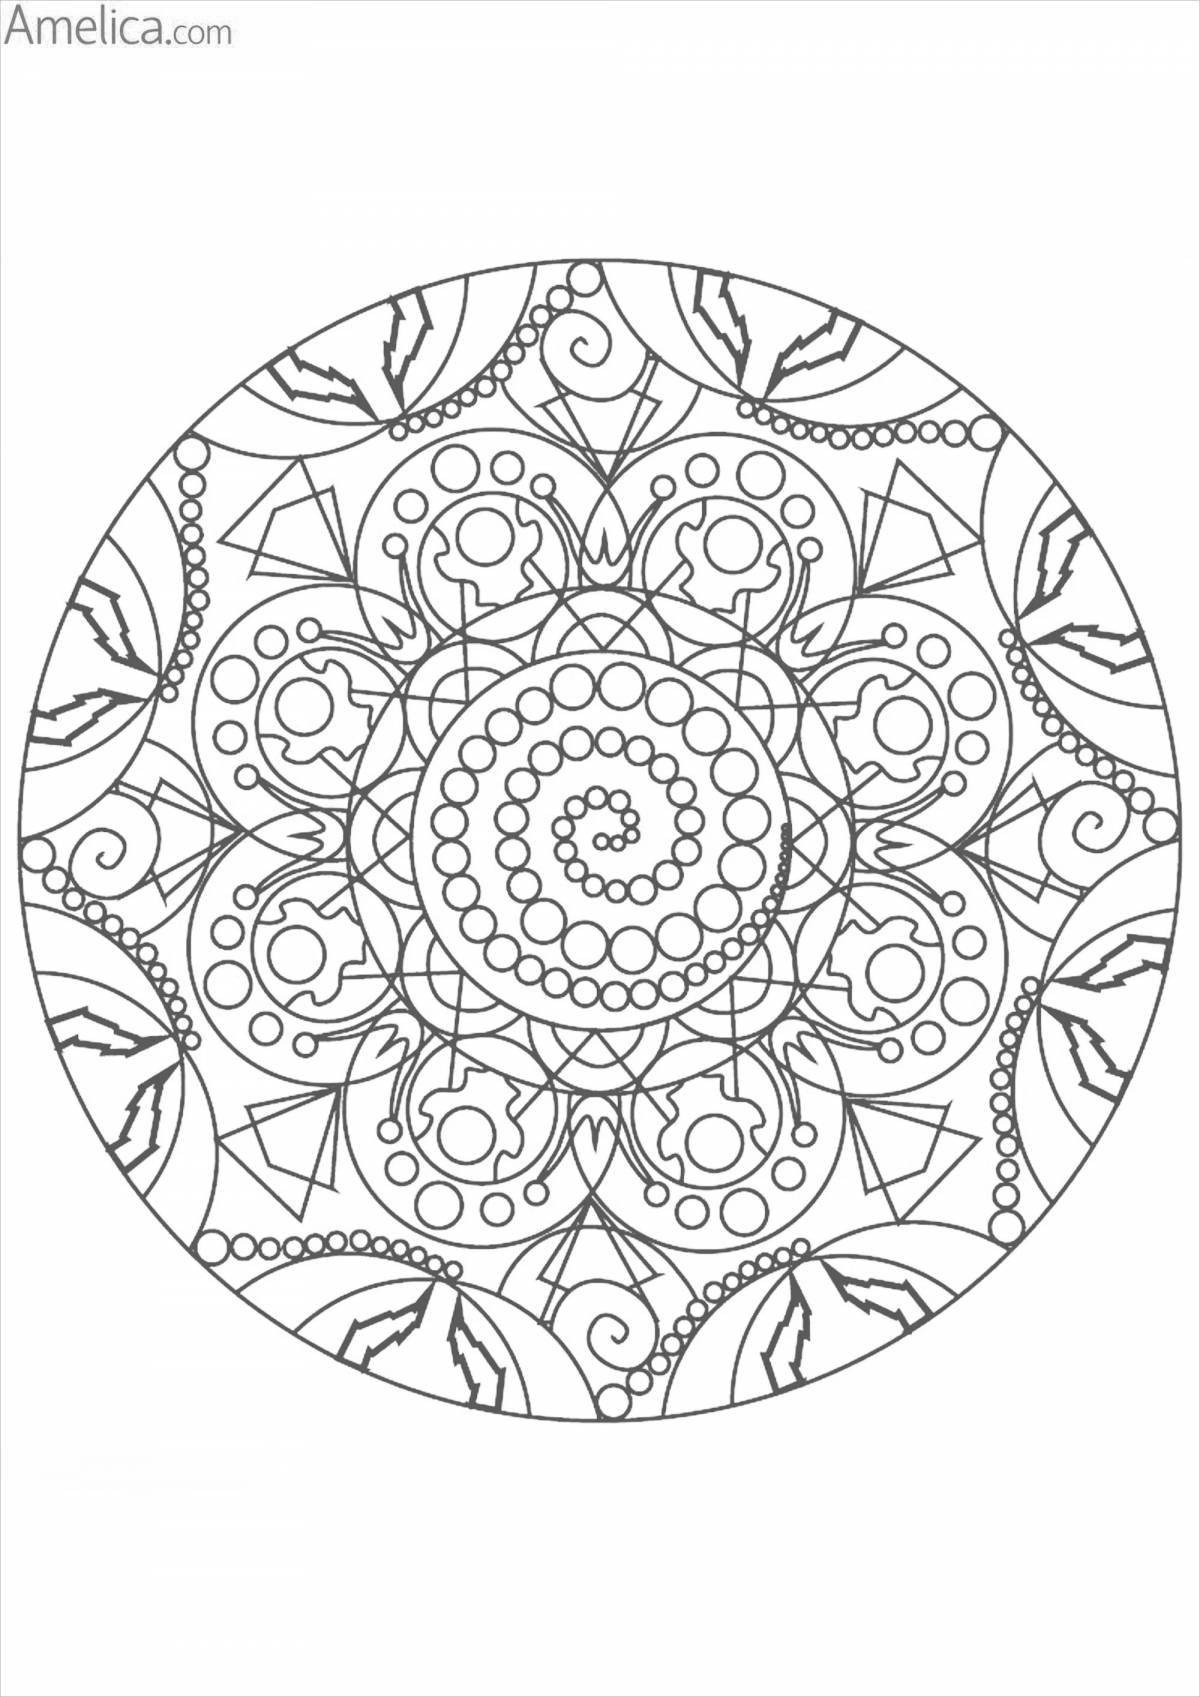 Fascinating coloring meaning of the mandala